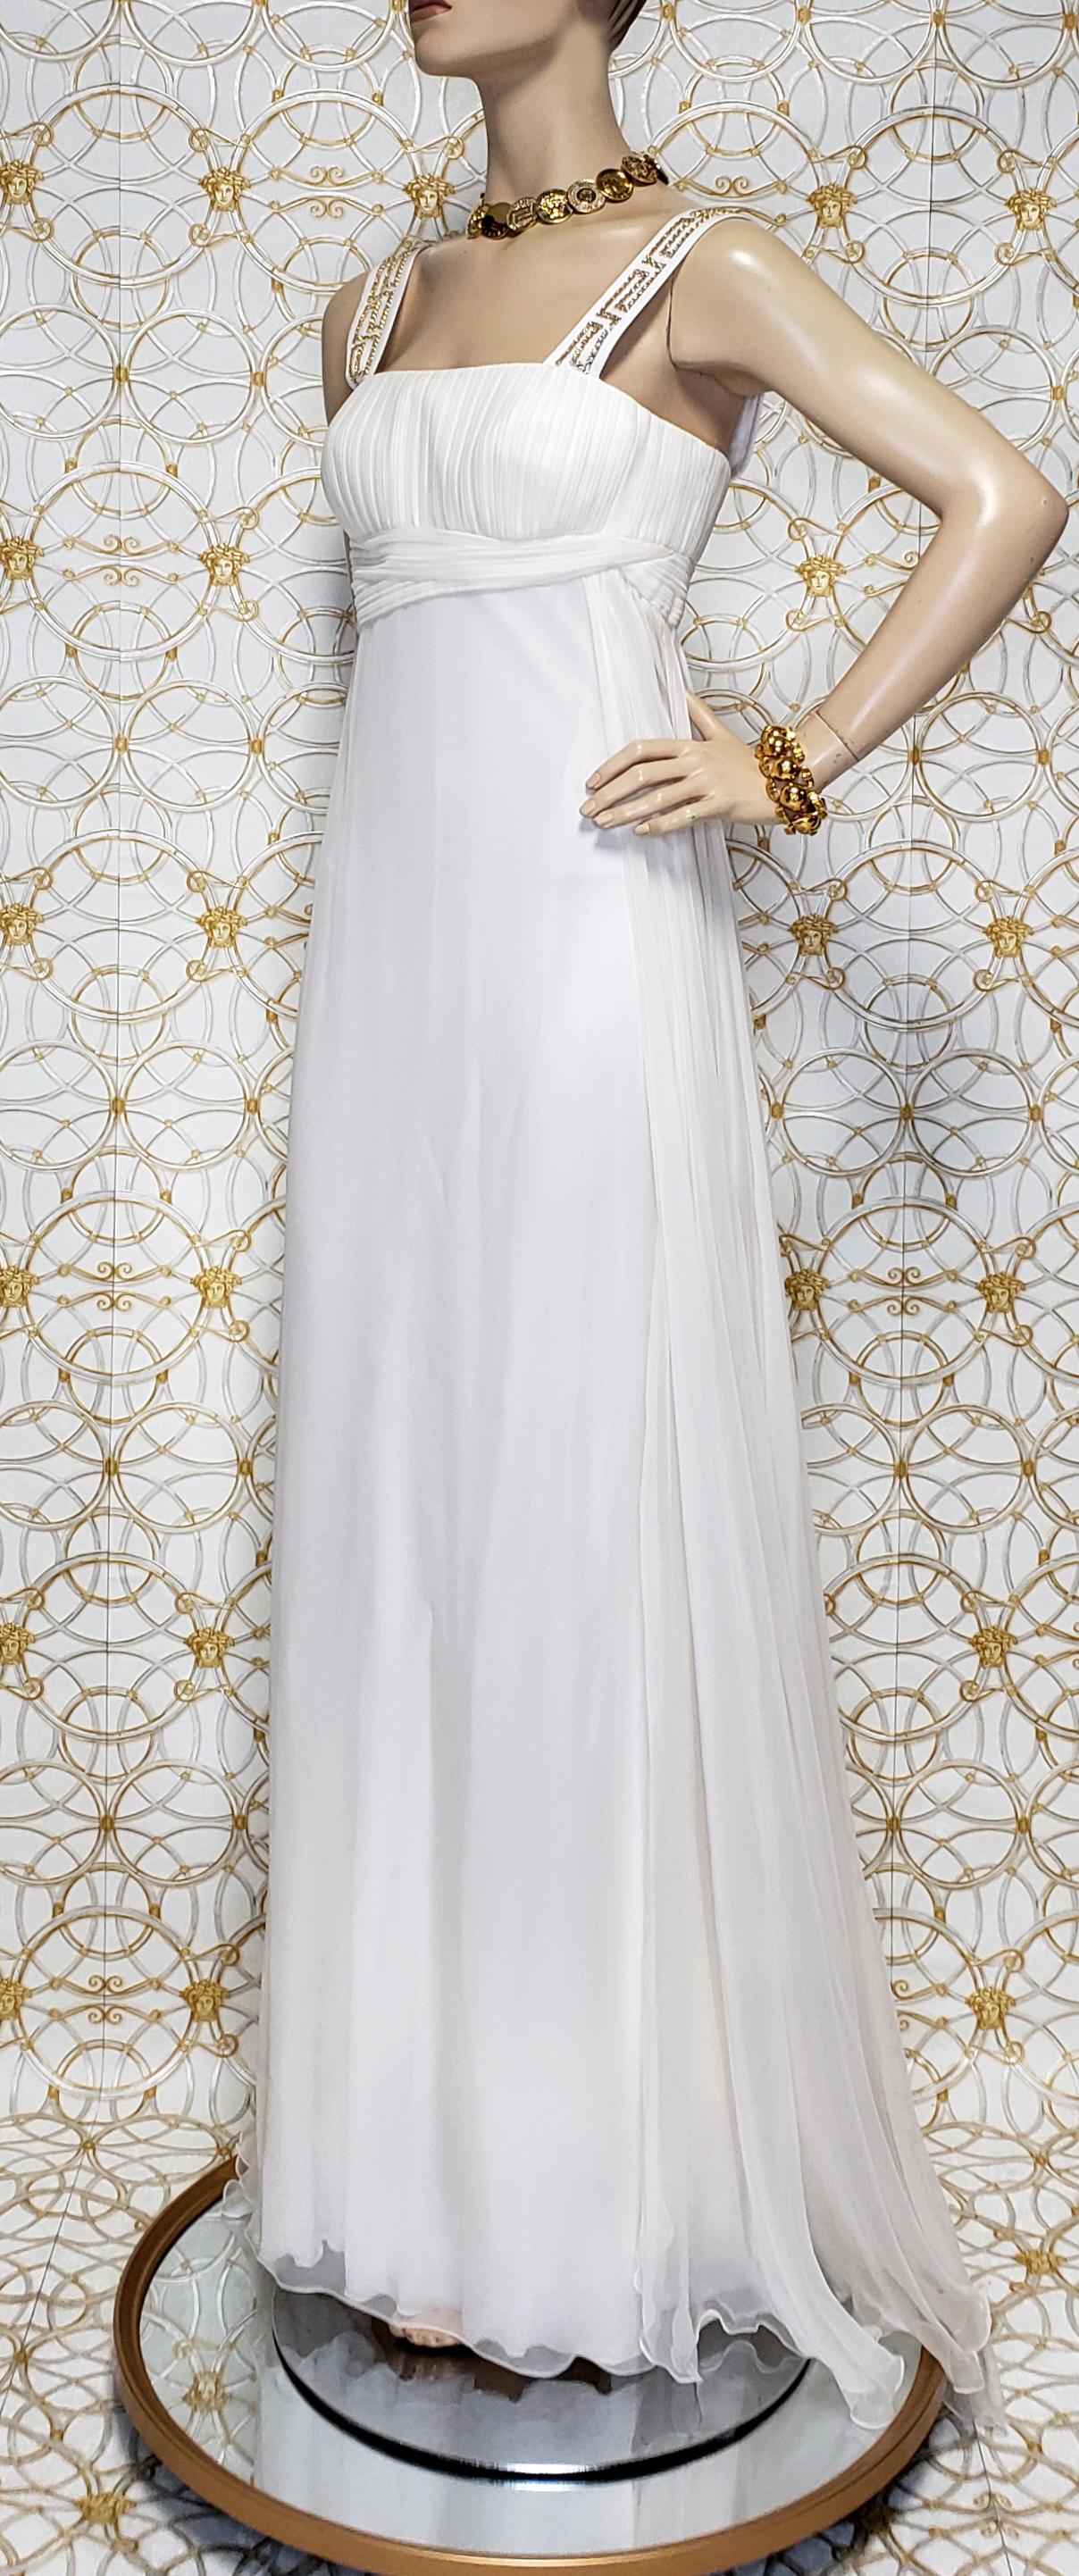 Women's New Versace Crystal Embellished White Silk Gown 44 - 8 For Sale